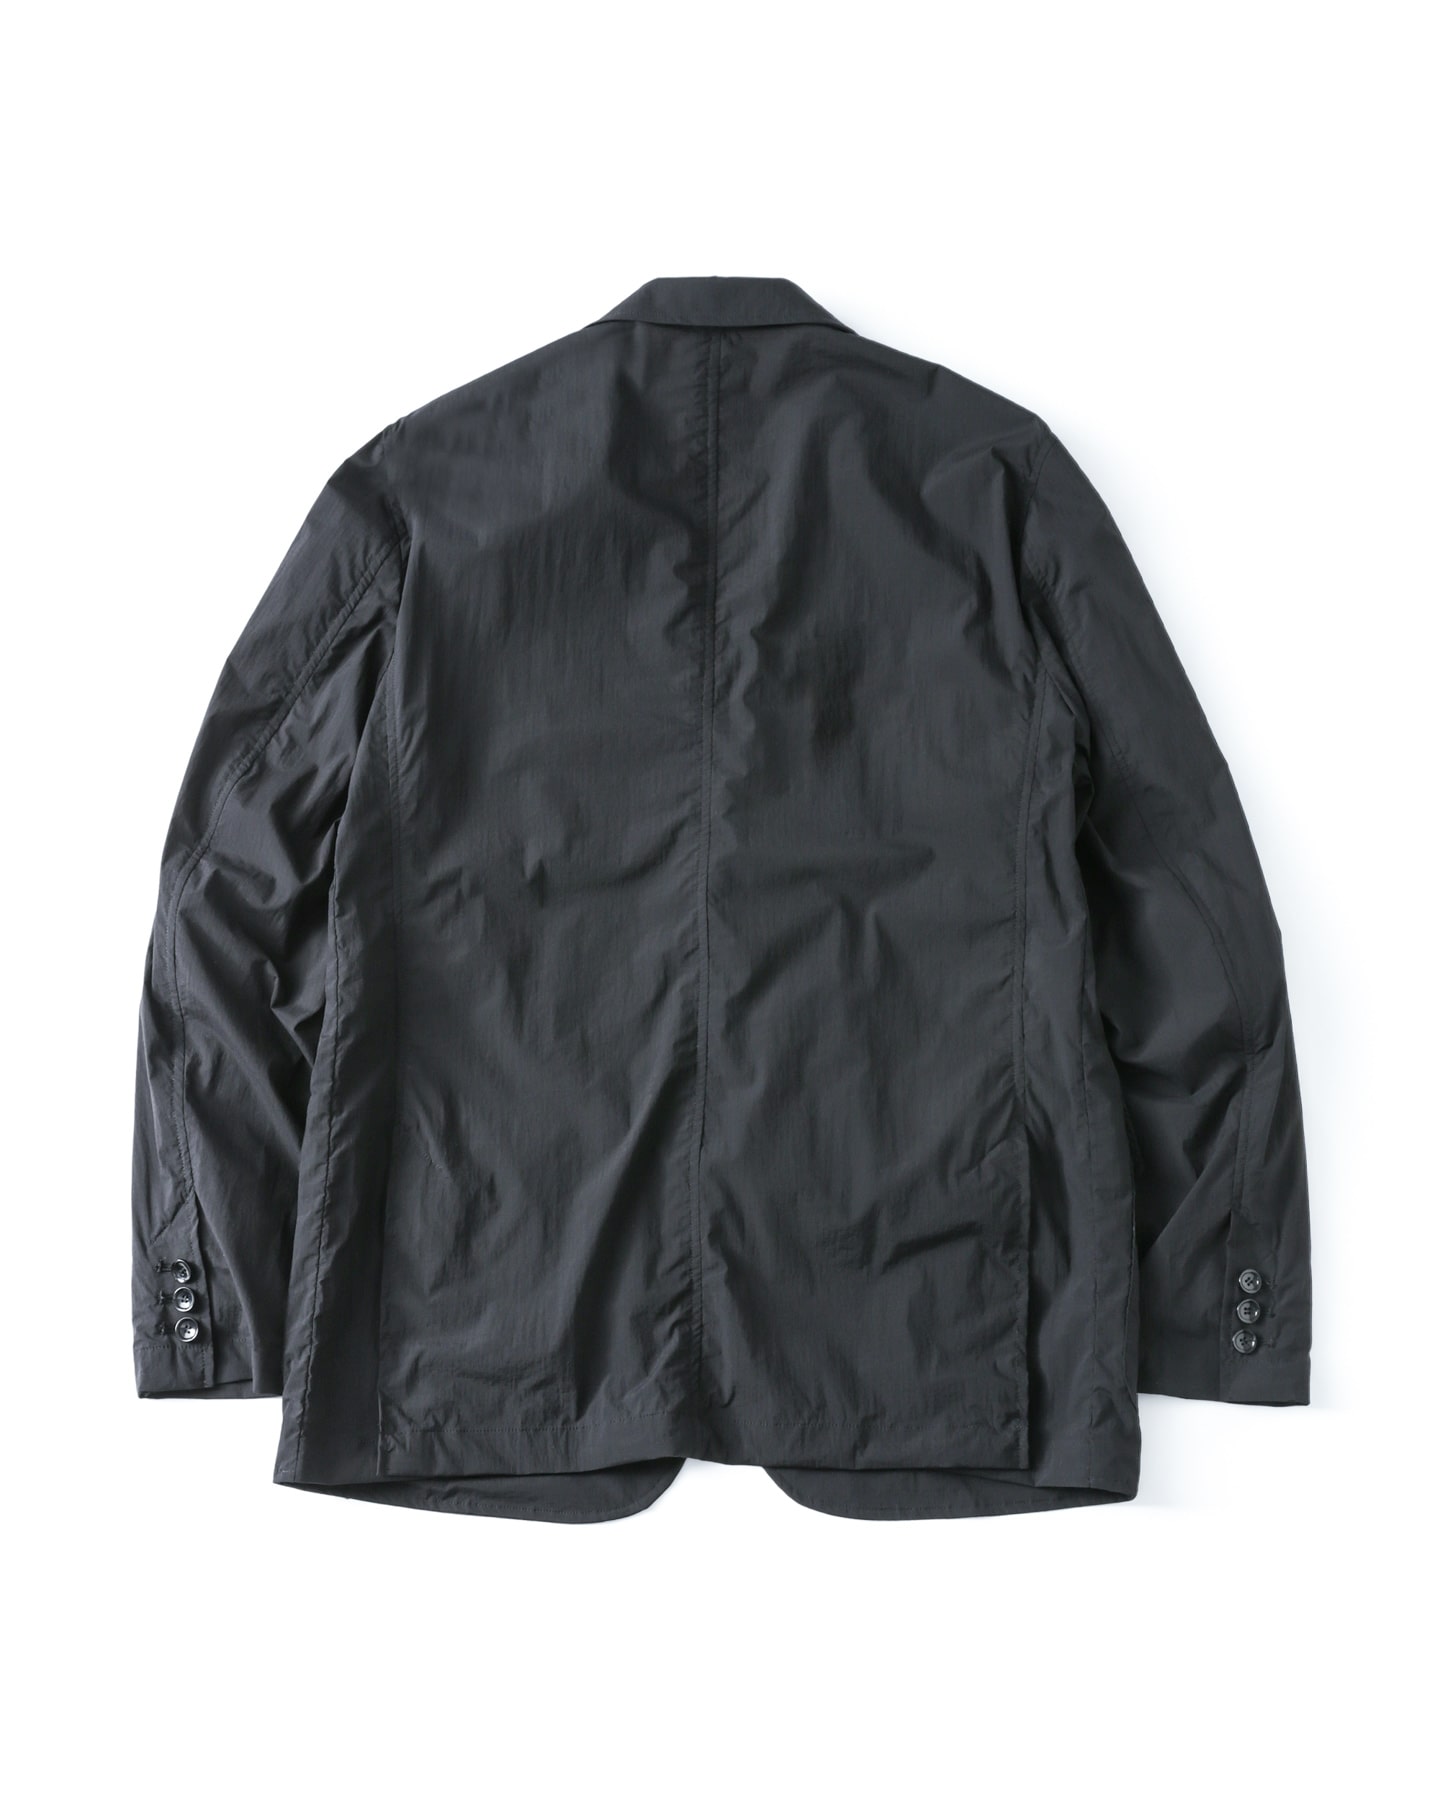 SOPH. | LIGHT WEIGHT STRETCH RIP STOP PACKABLE 2B JACKET(S BLACK):